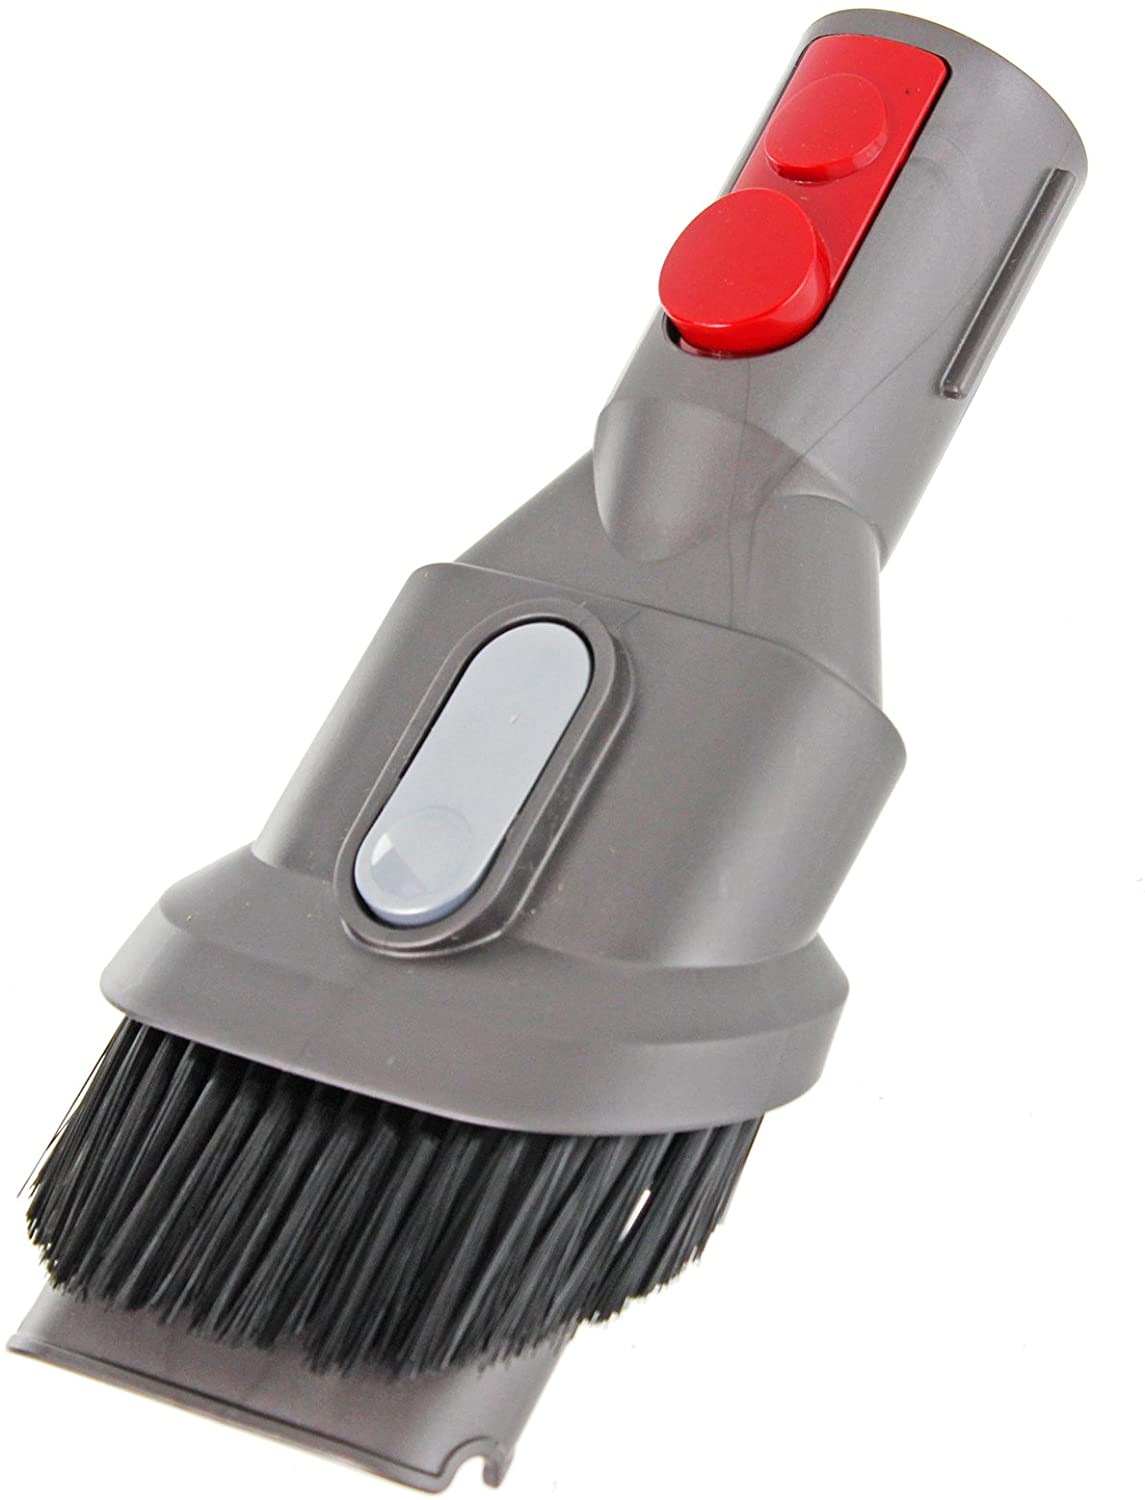 Dyson Genuine V8 Animal Absolute Cordless Combination Brush Attachment Tool